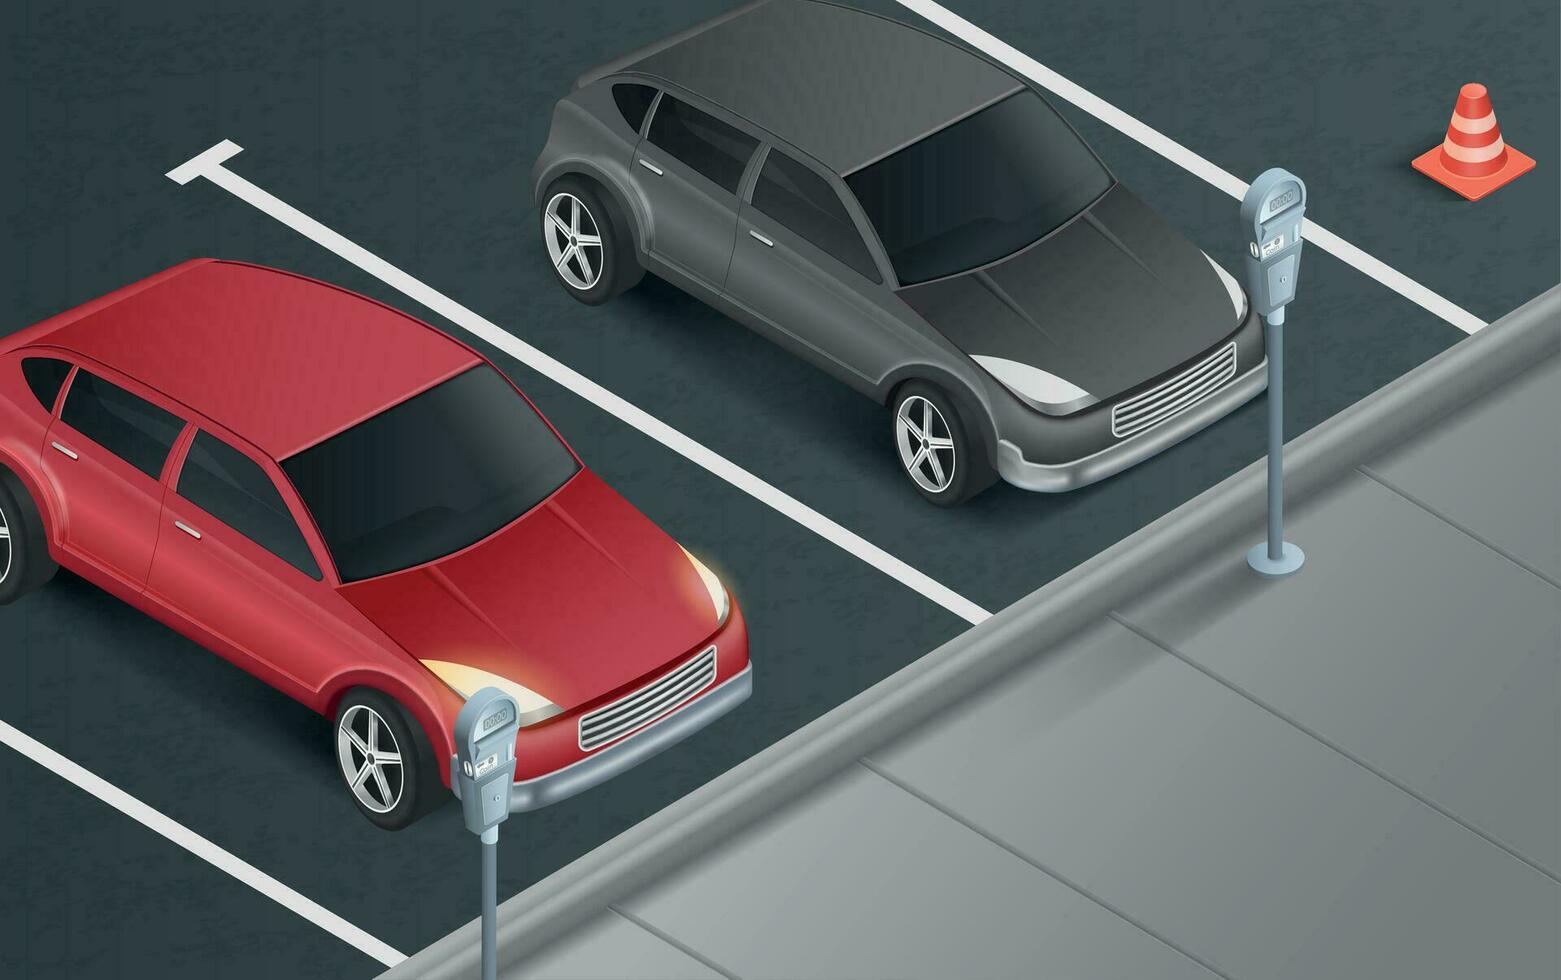 Paid Car Parking Realistic Illustration vector